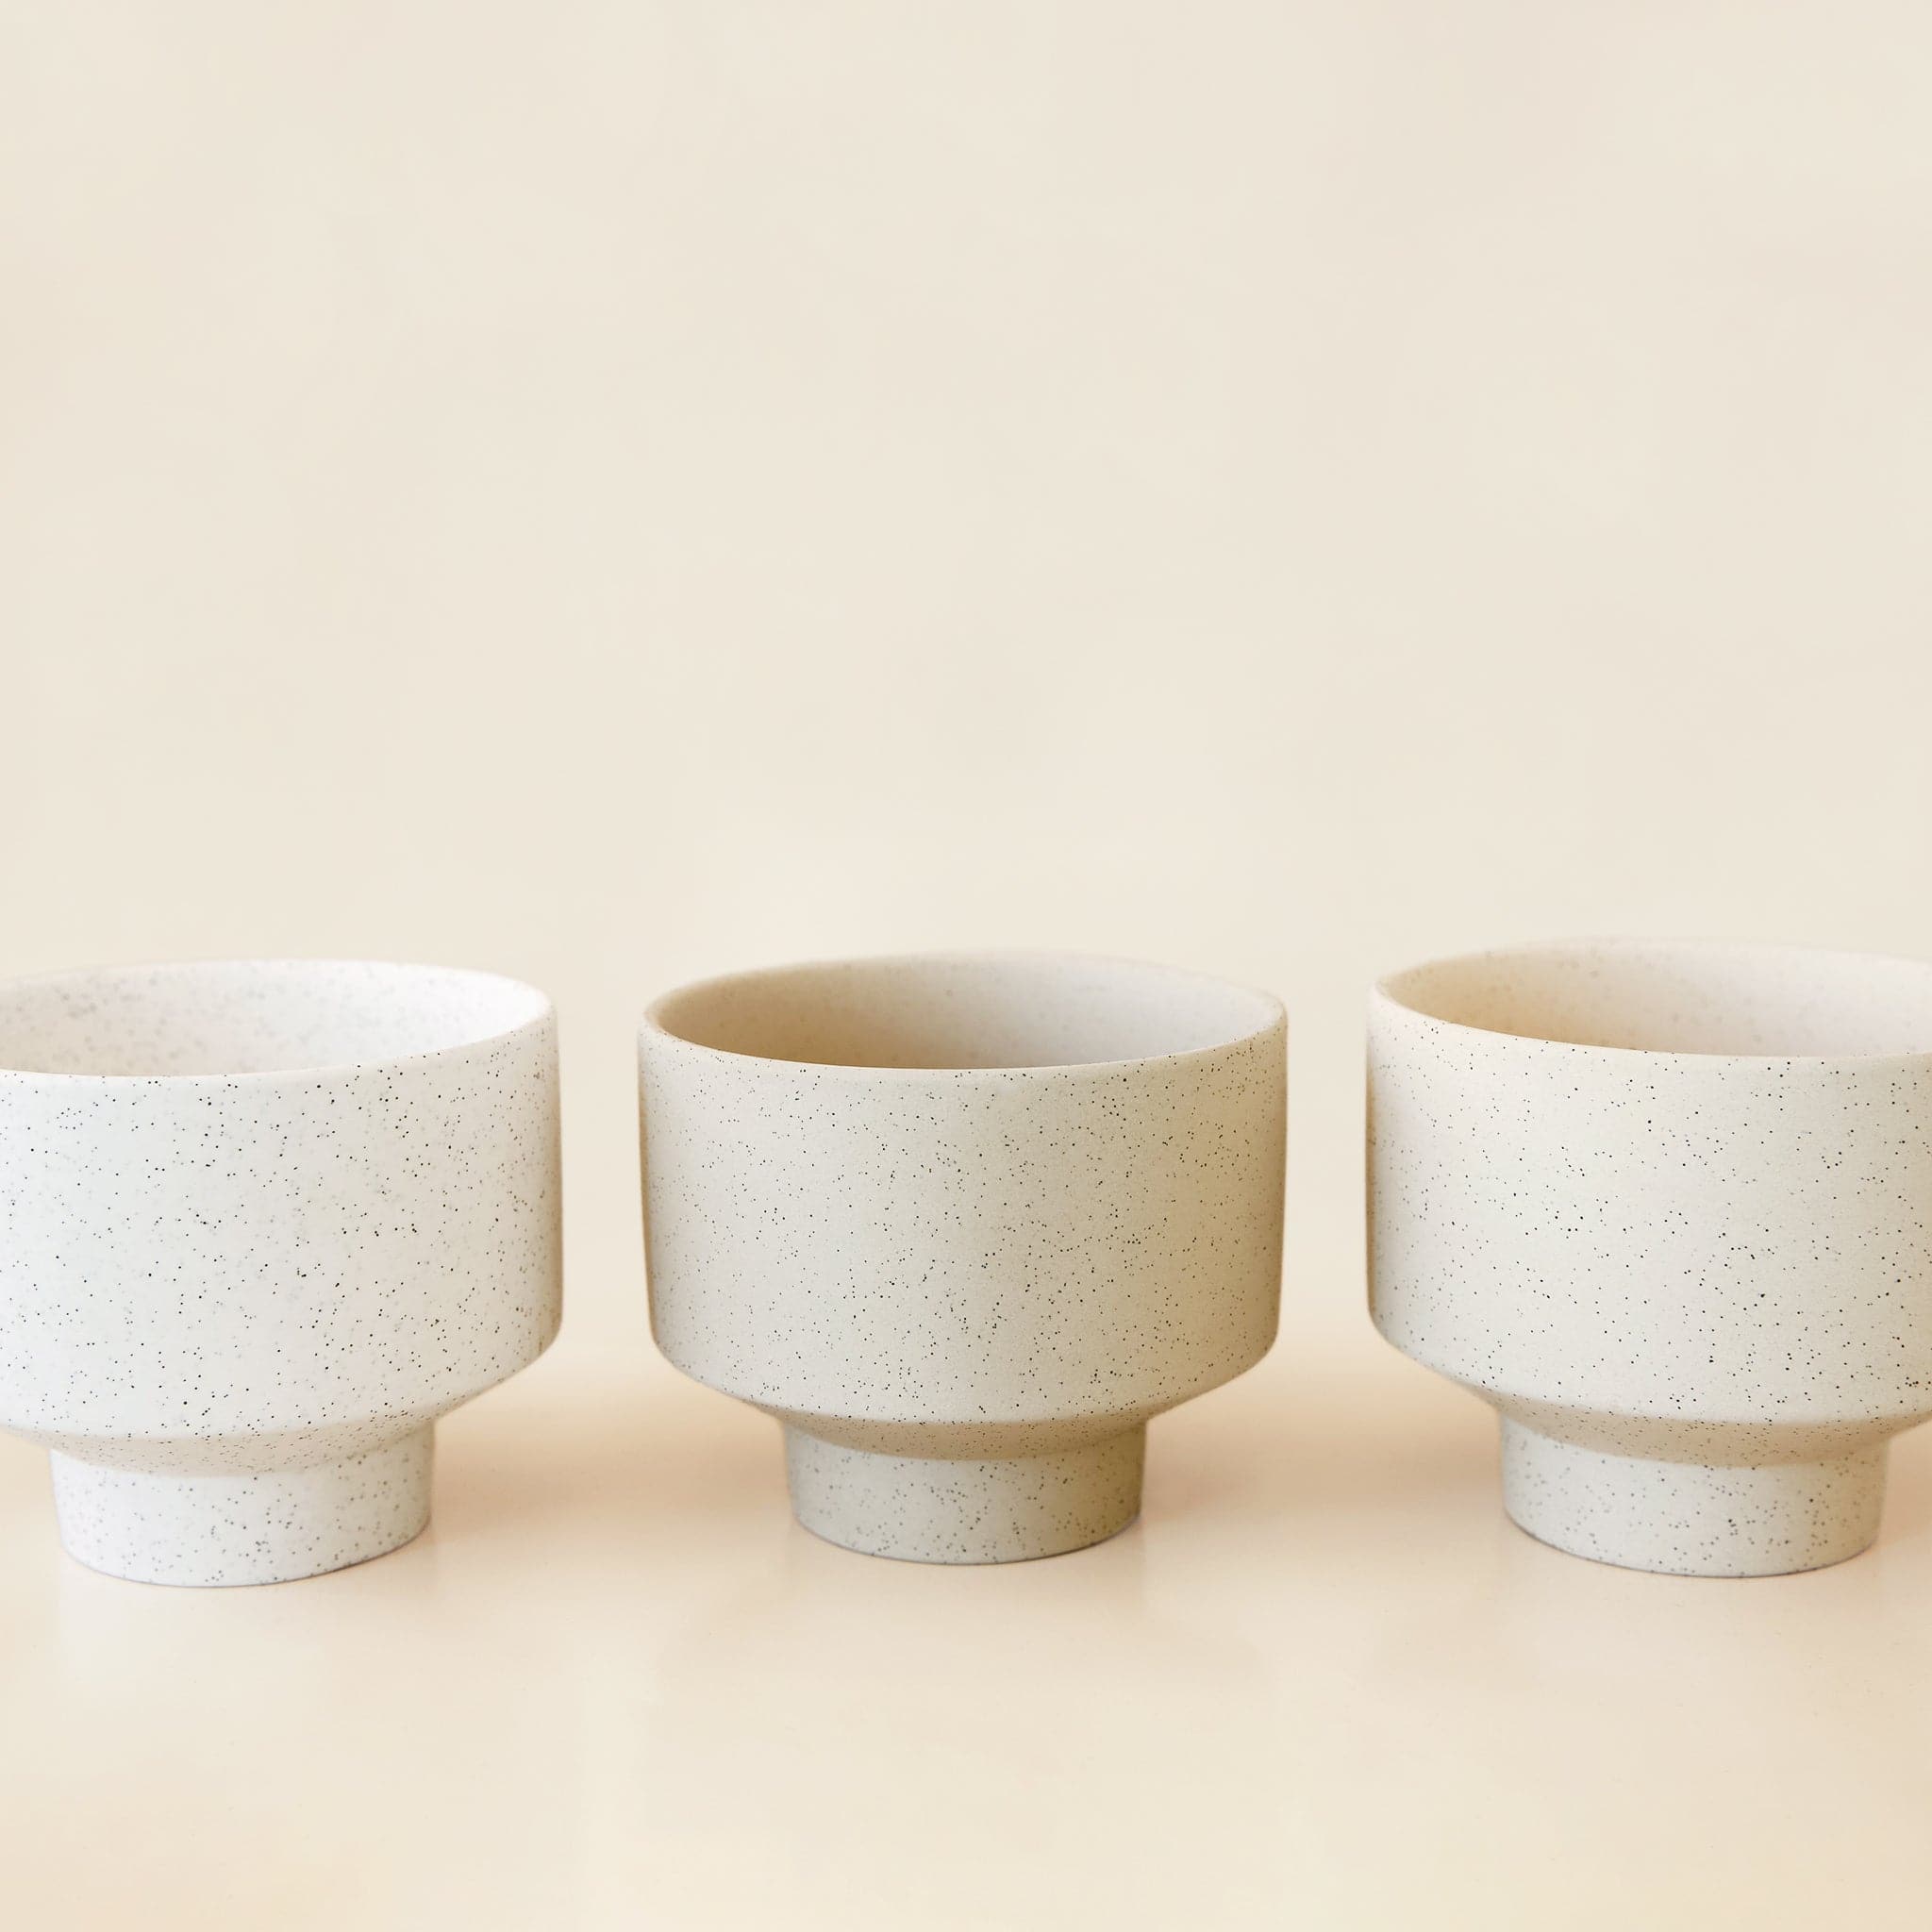 In front of a tan background is three round, ceramic white pots with a tapered bottom. The pots have black speckles.